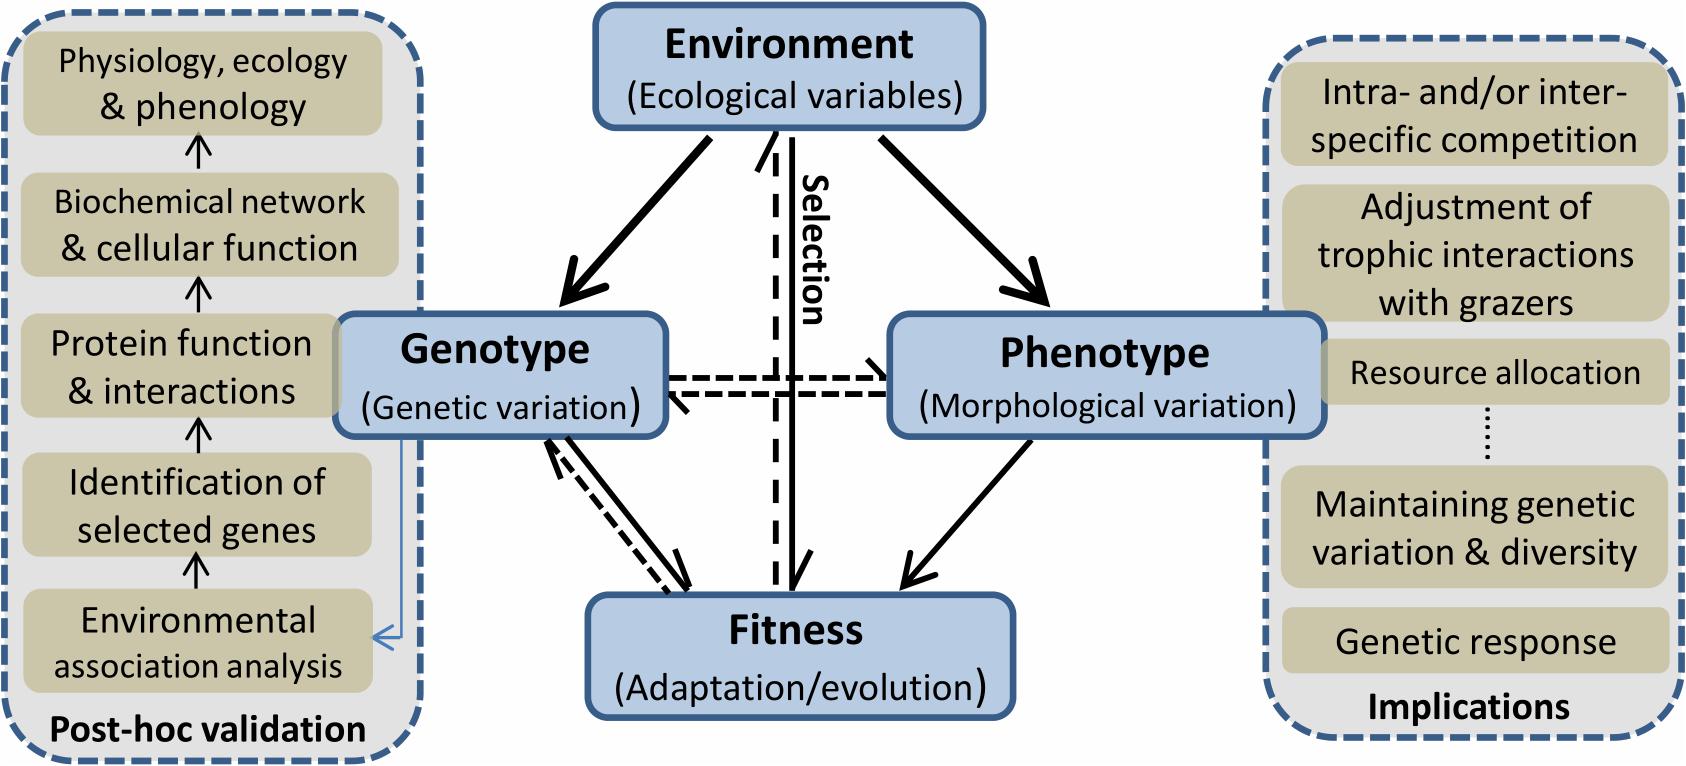 What are adaptation and evolution?